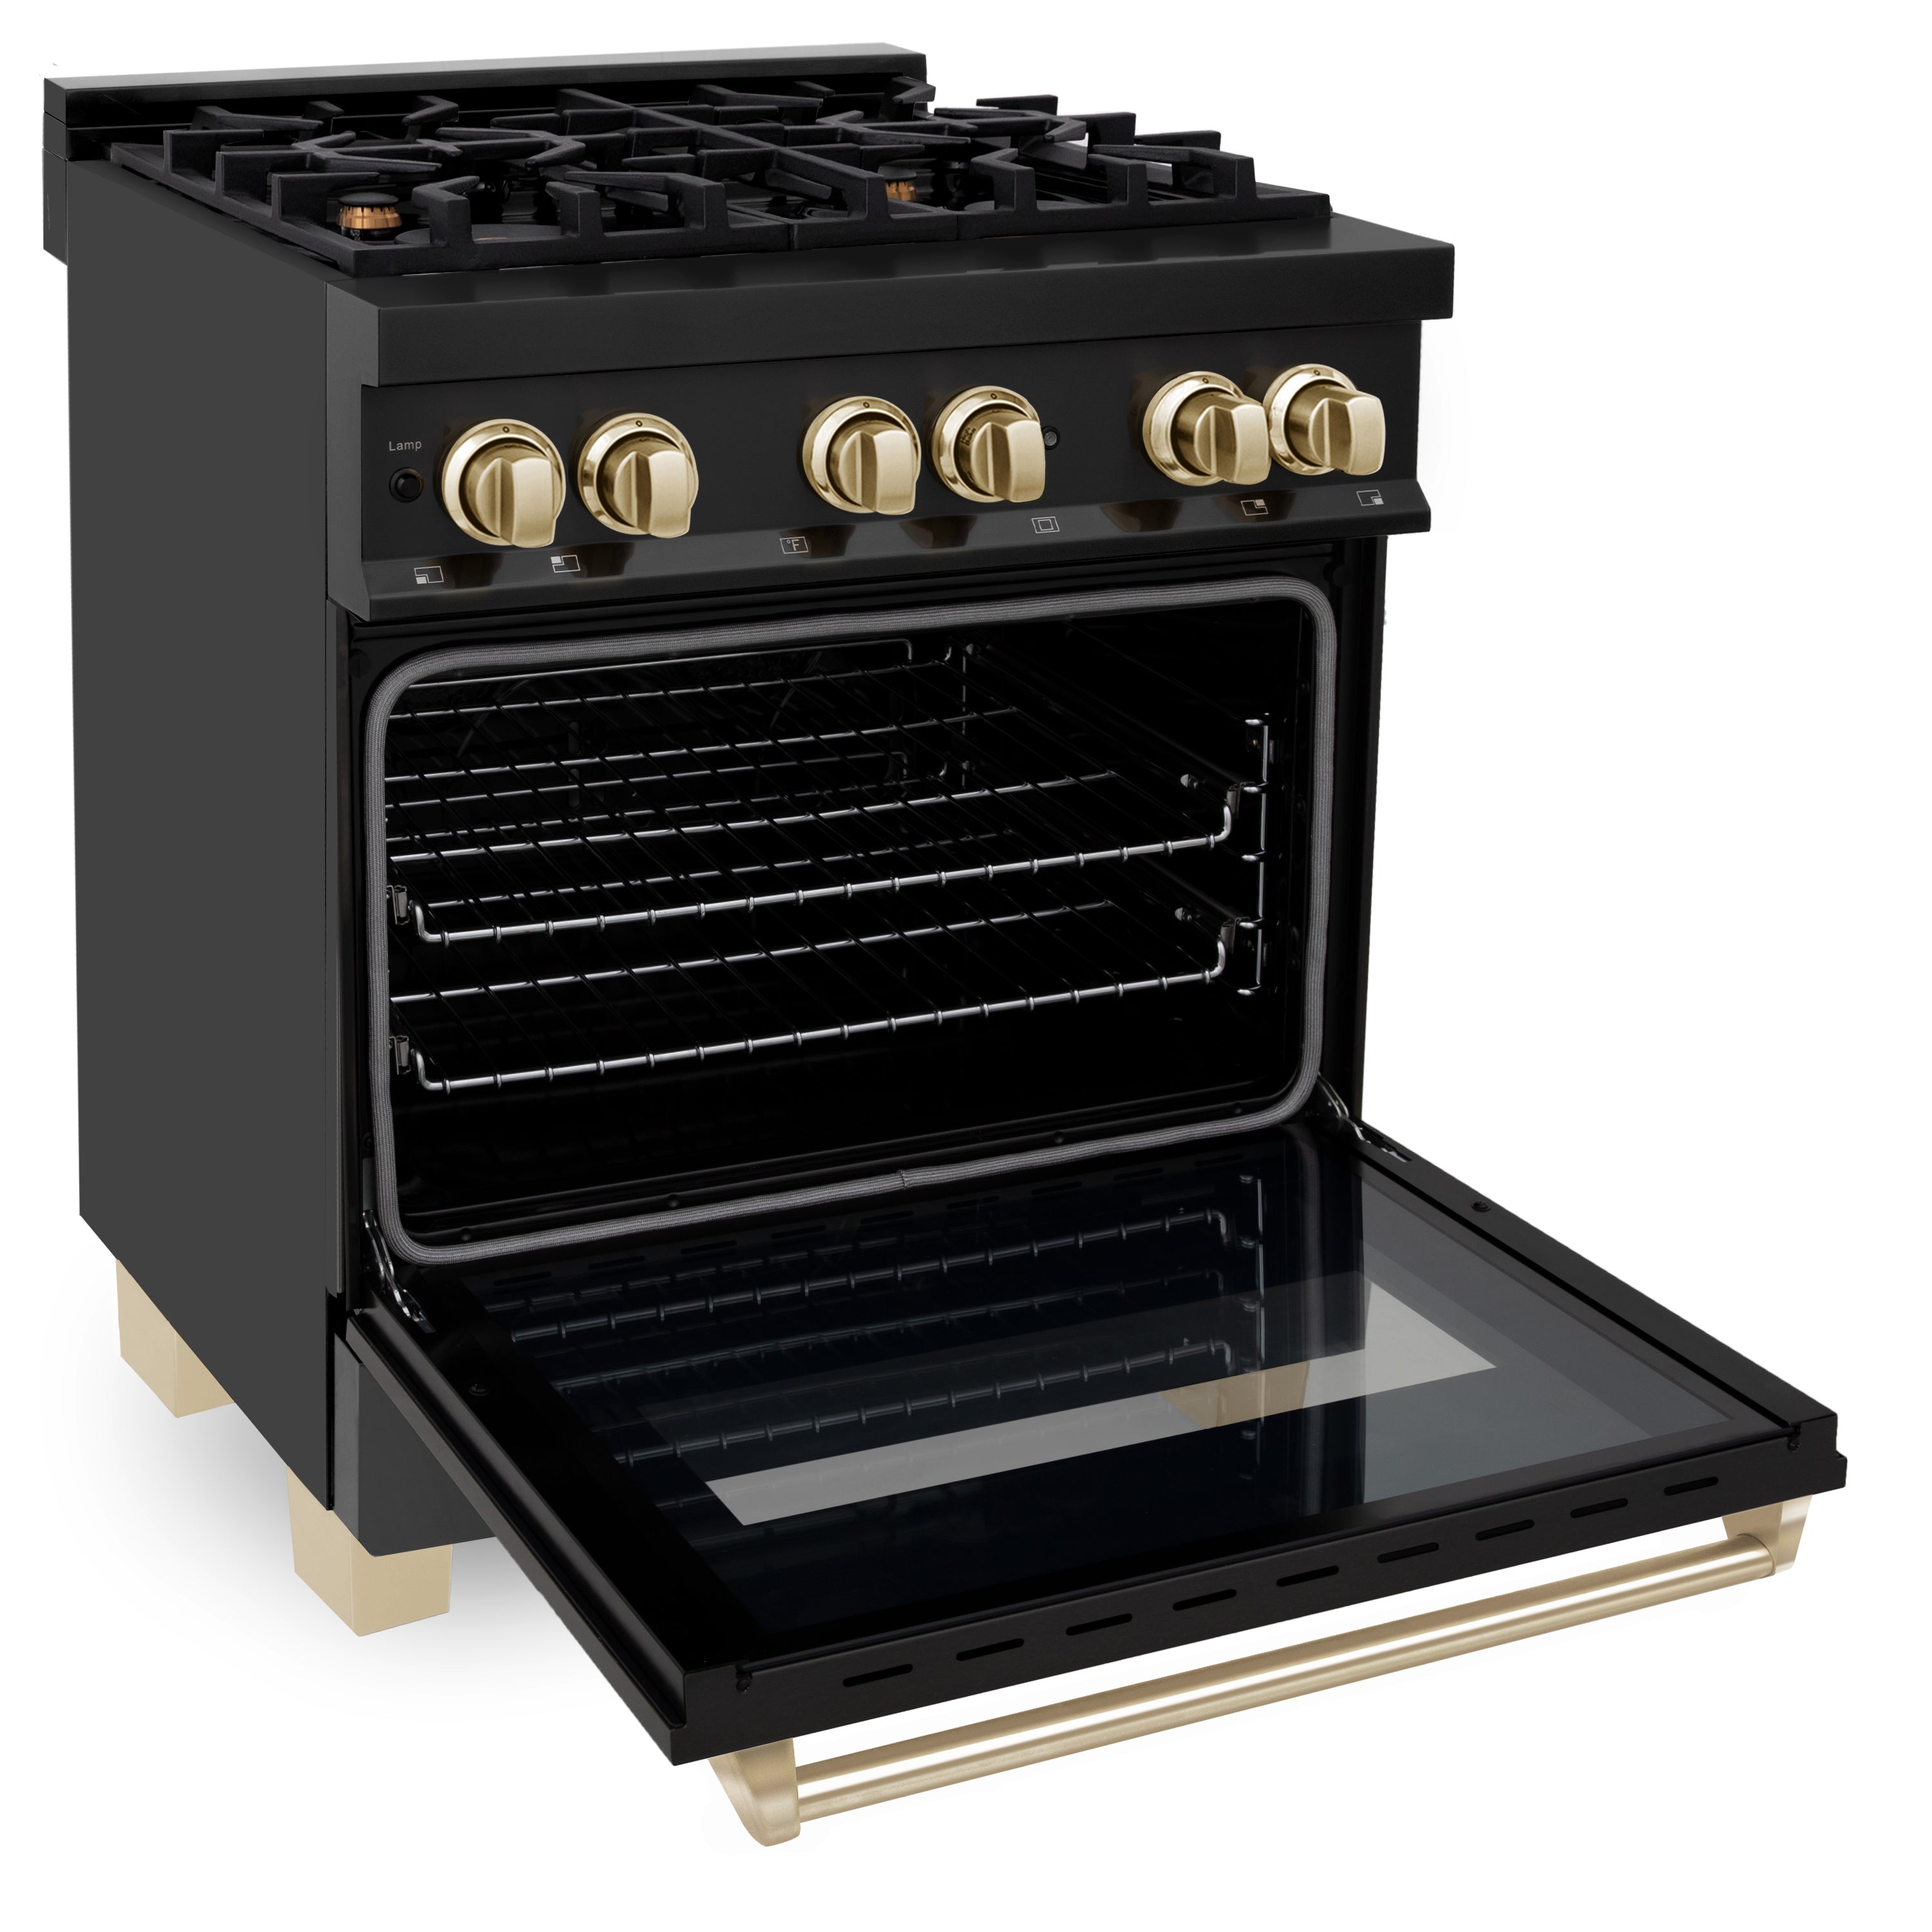 ZLINE Autograph Edition 30" 4.0 cu. ft. Dual Fuel Range with Gas Stove and Electric Oven in Black Stainless Steel with Polished Gold Accents (RABZ-30-G)